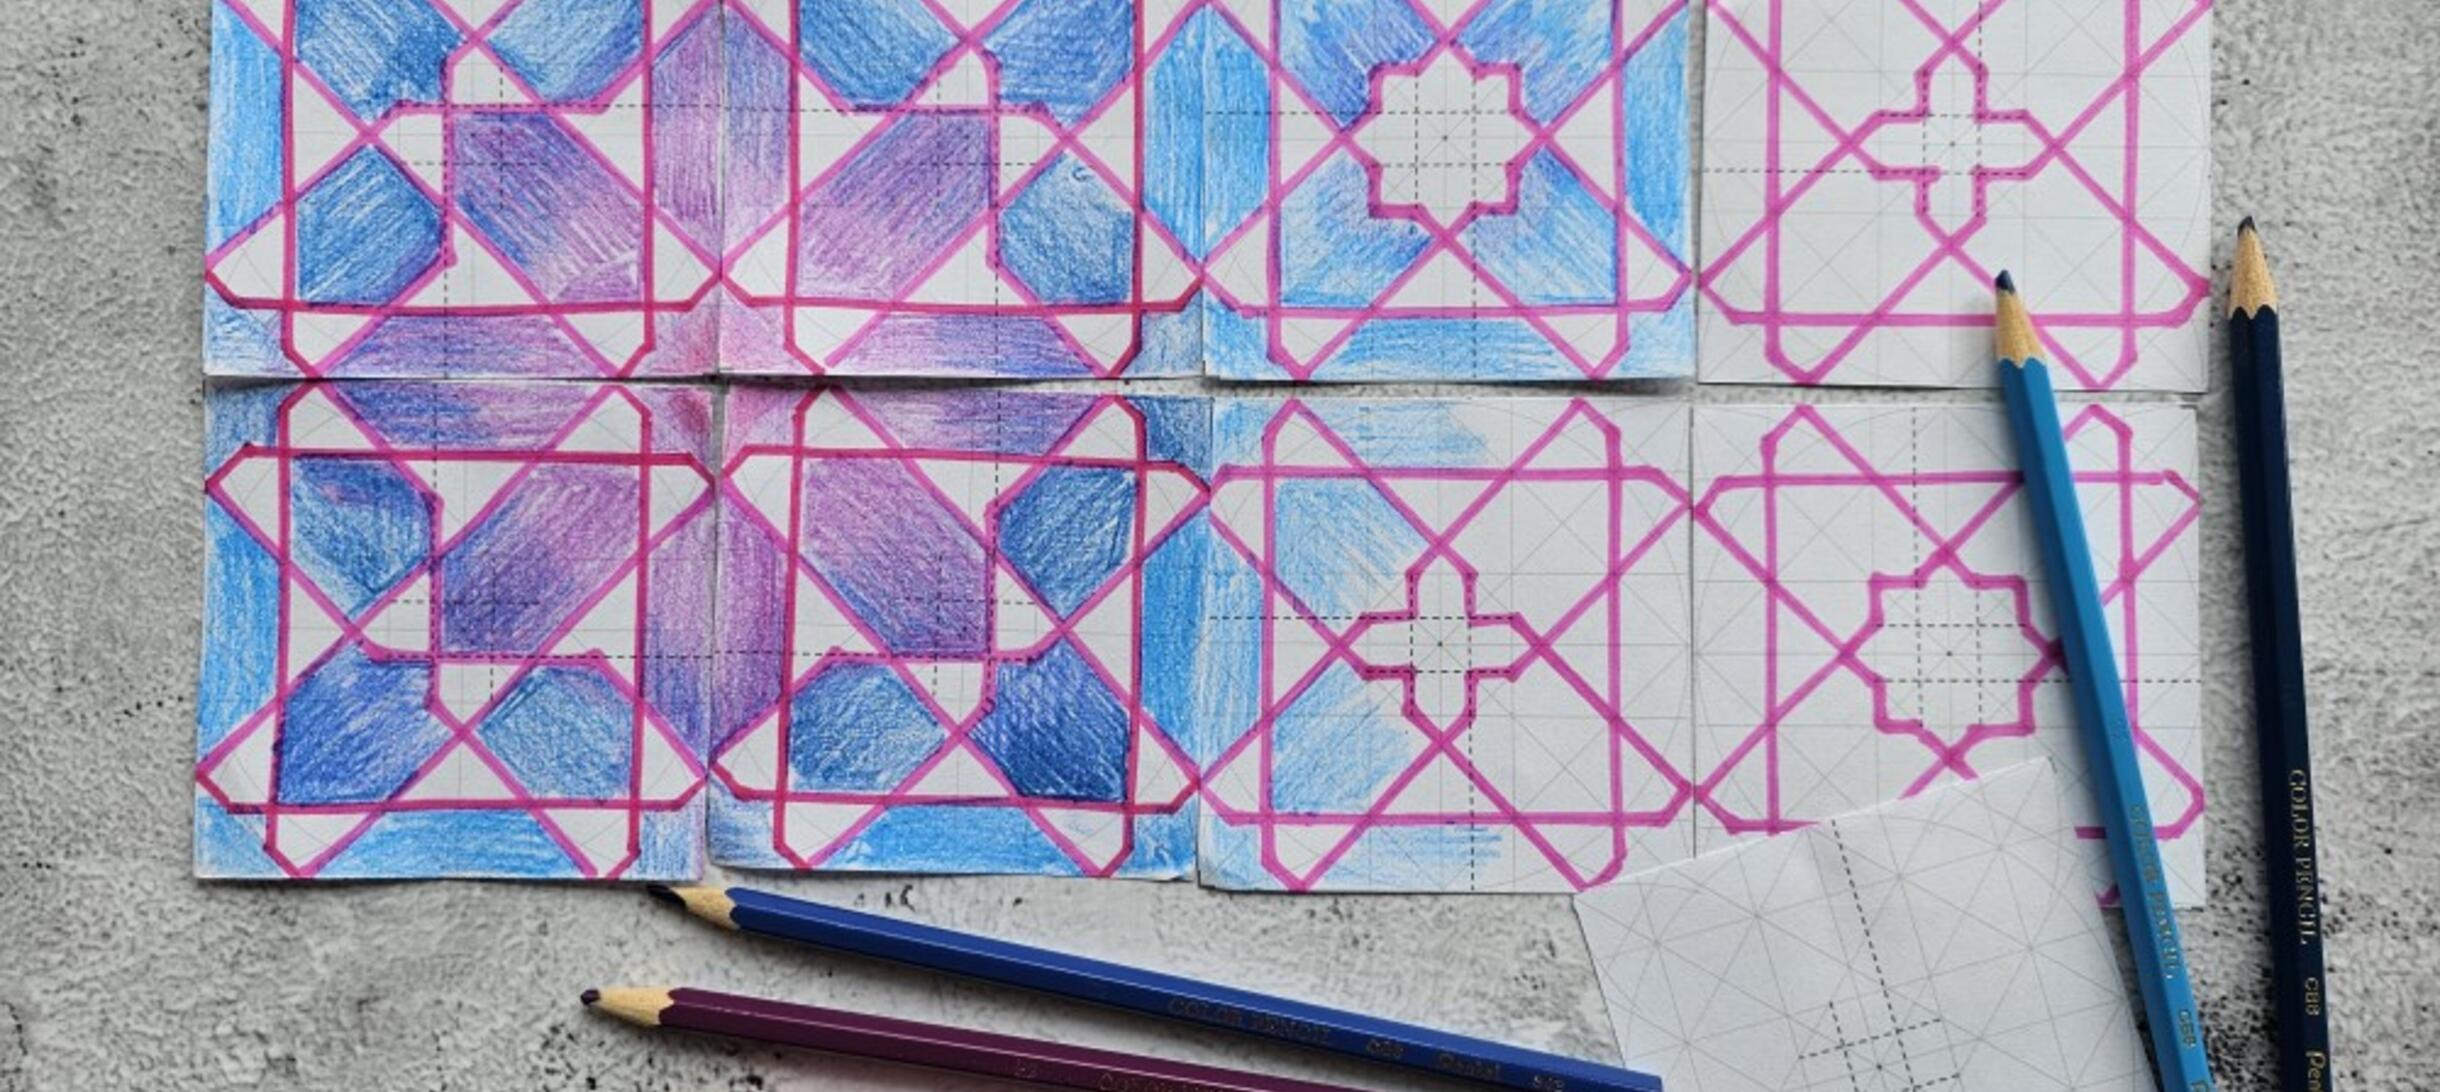 Timelapse drawing of a Moroccan geometric pattern with ruler and compass on  Vimeo